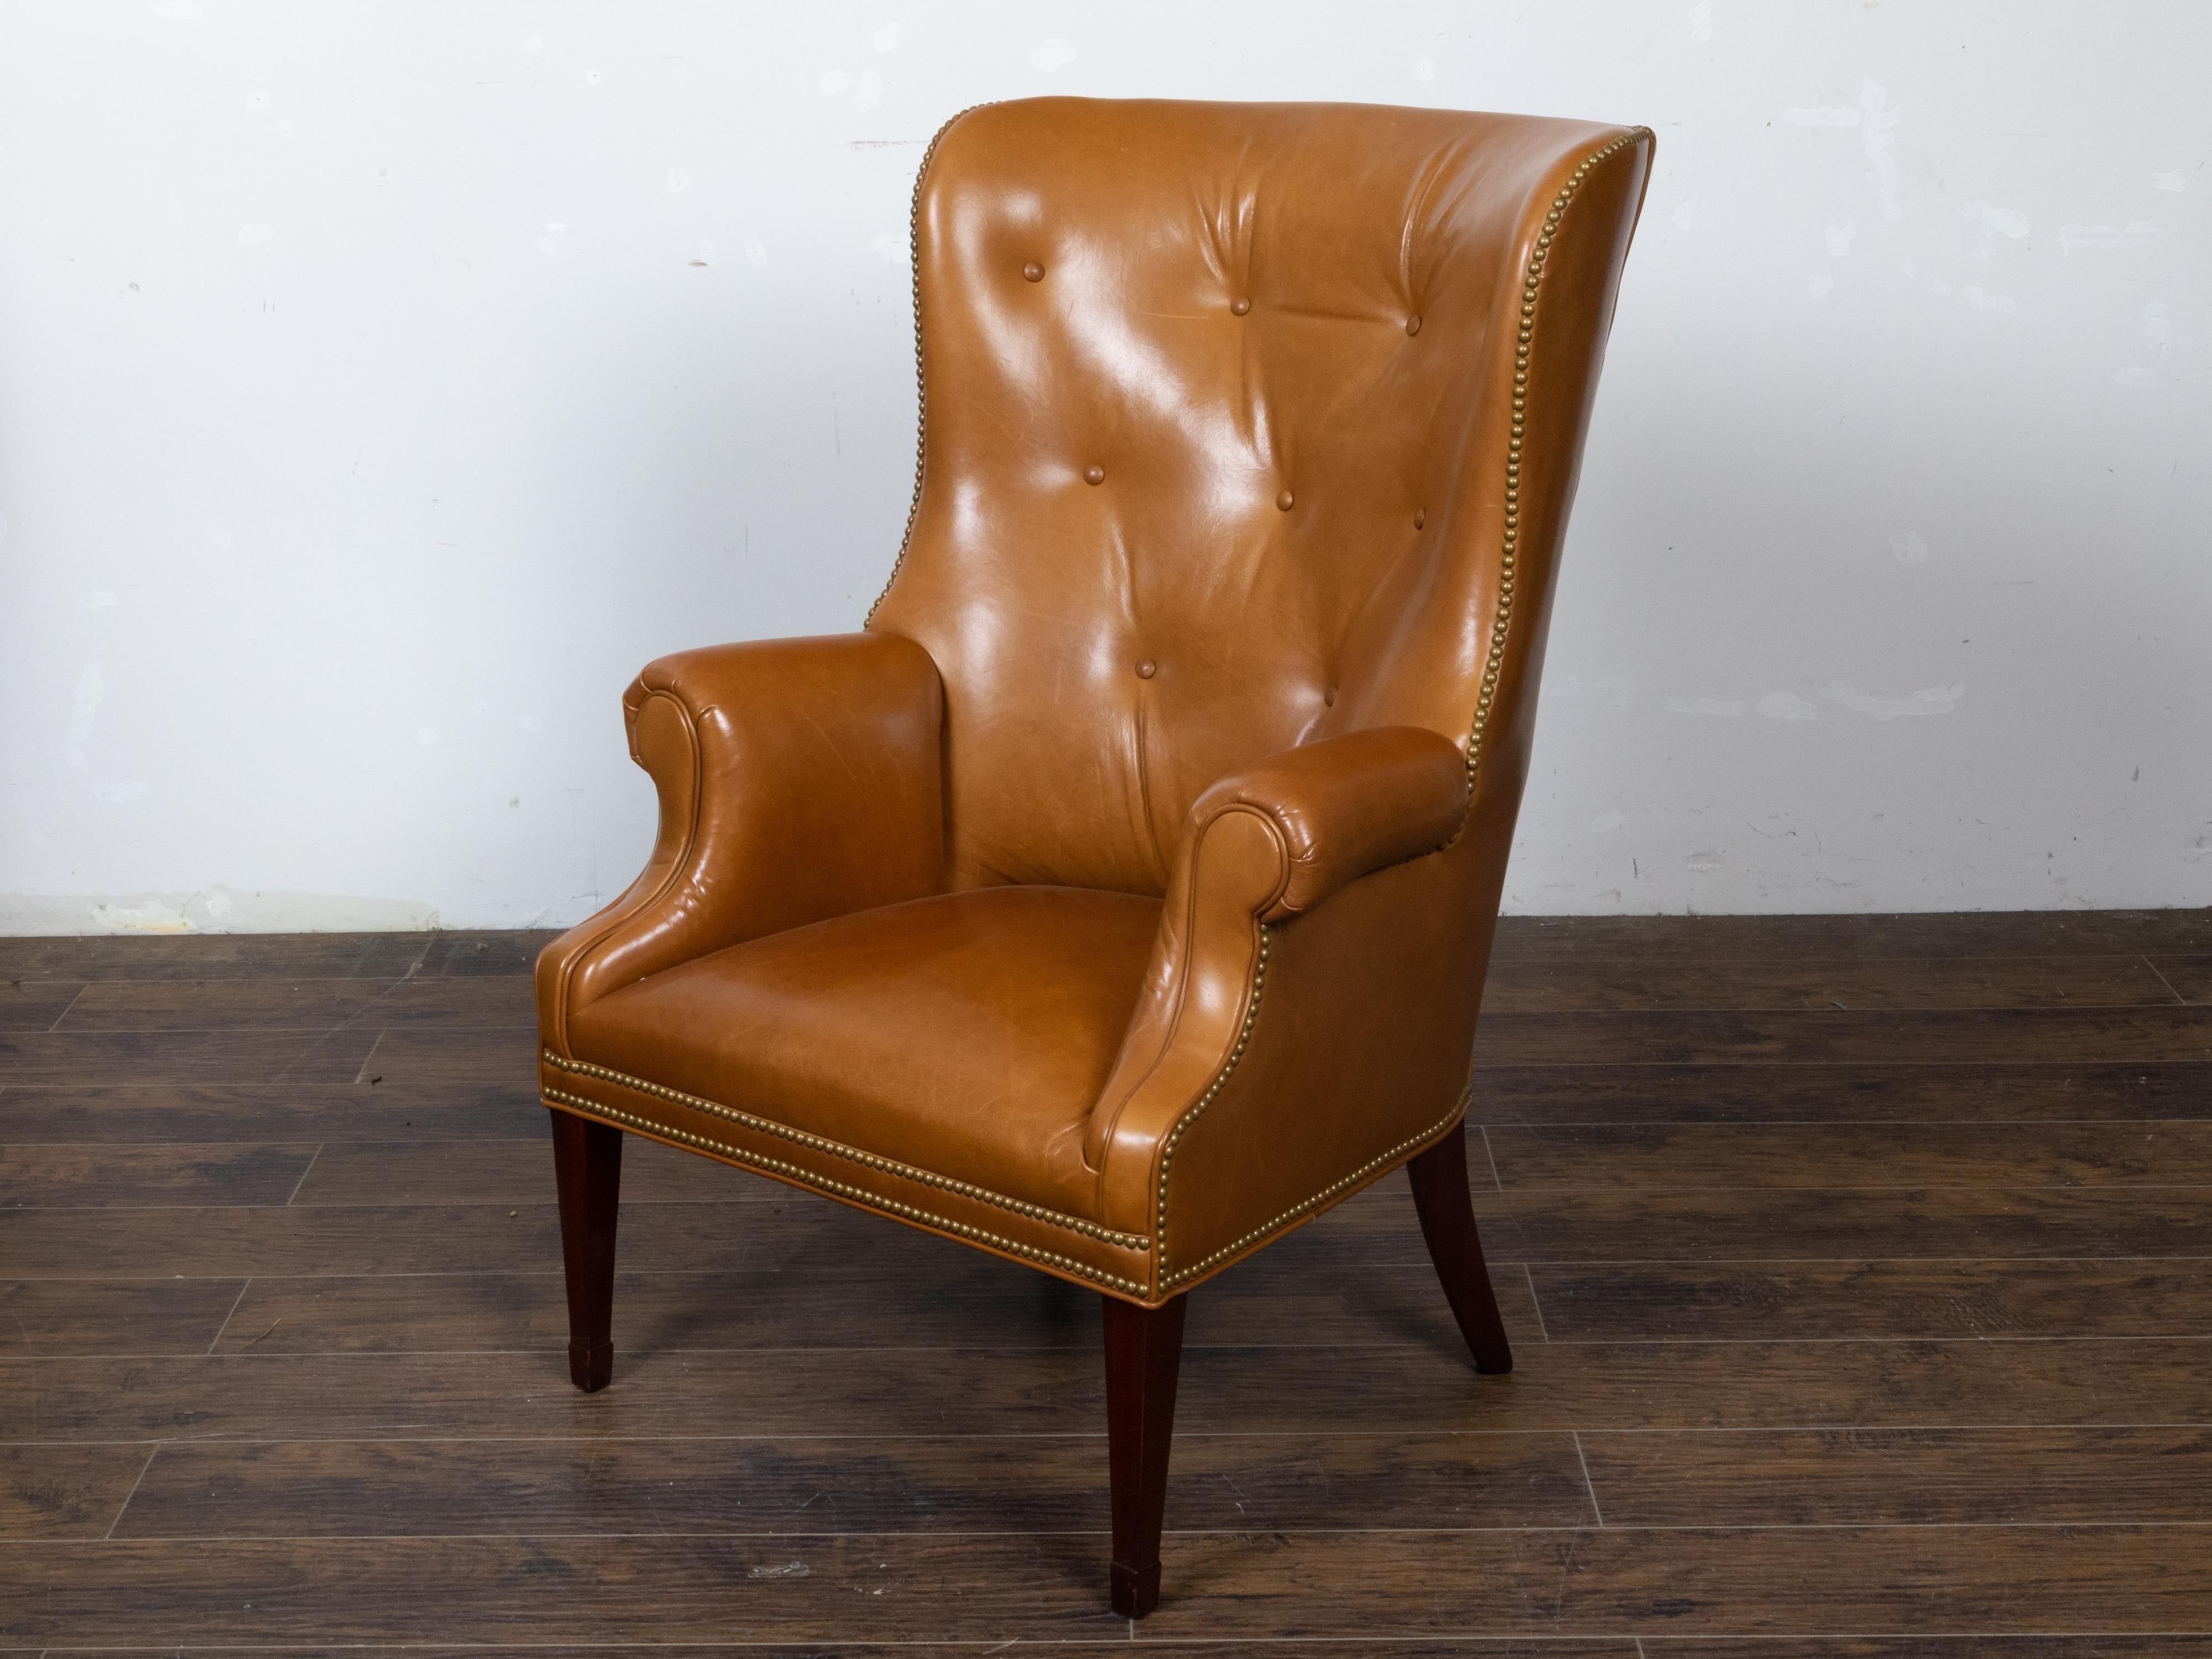 English Brown Leather Wingback Chair with Brass Nailhead Trim, circa 1930-1940 For Sale 3